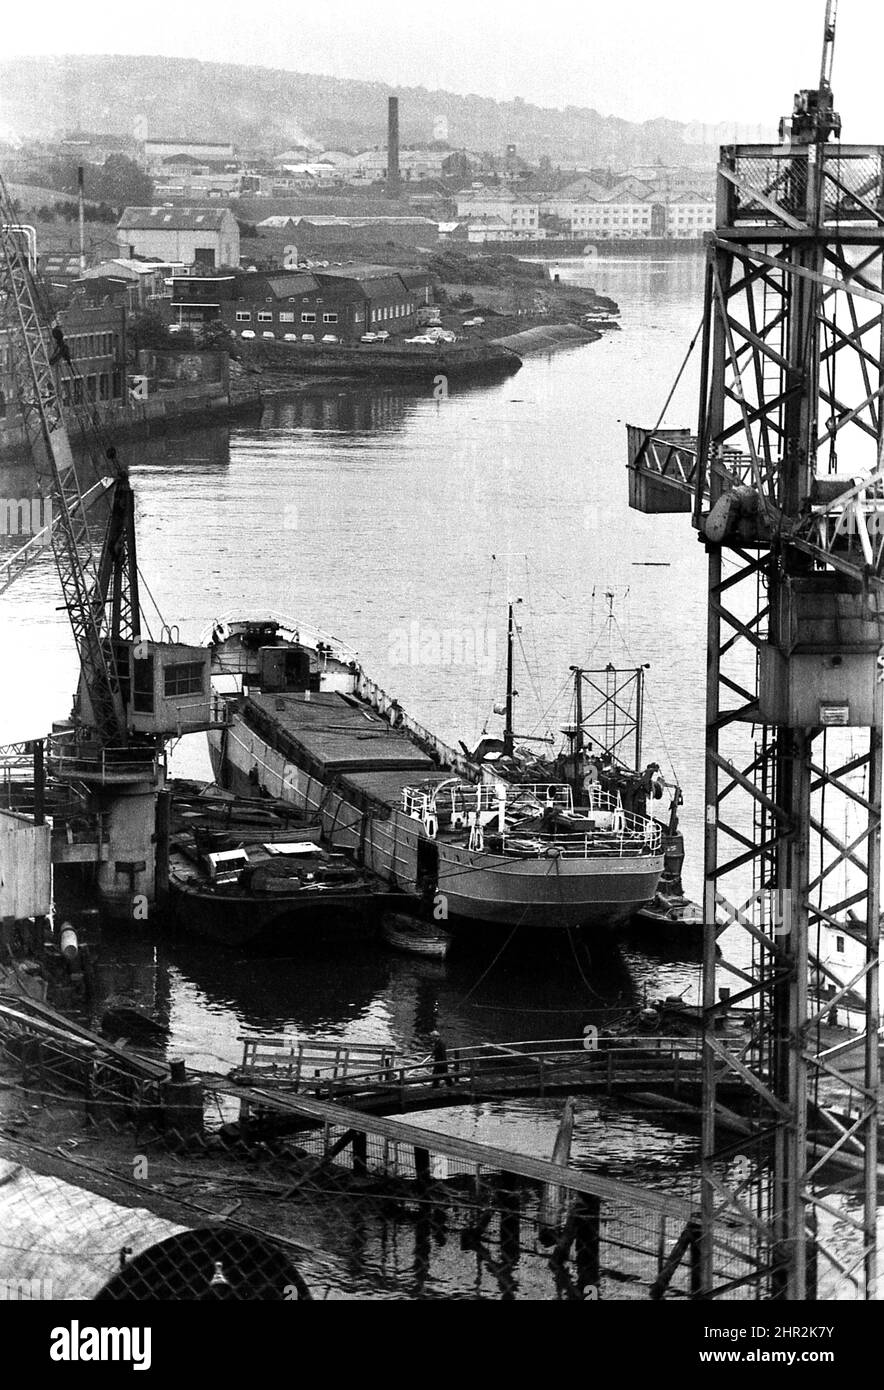 SHOT 184  R B Harrison boat builders repairers and dismantlers Gateshead river Tyne 1969 Stock Photo